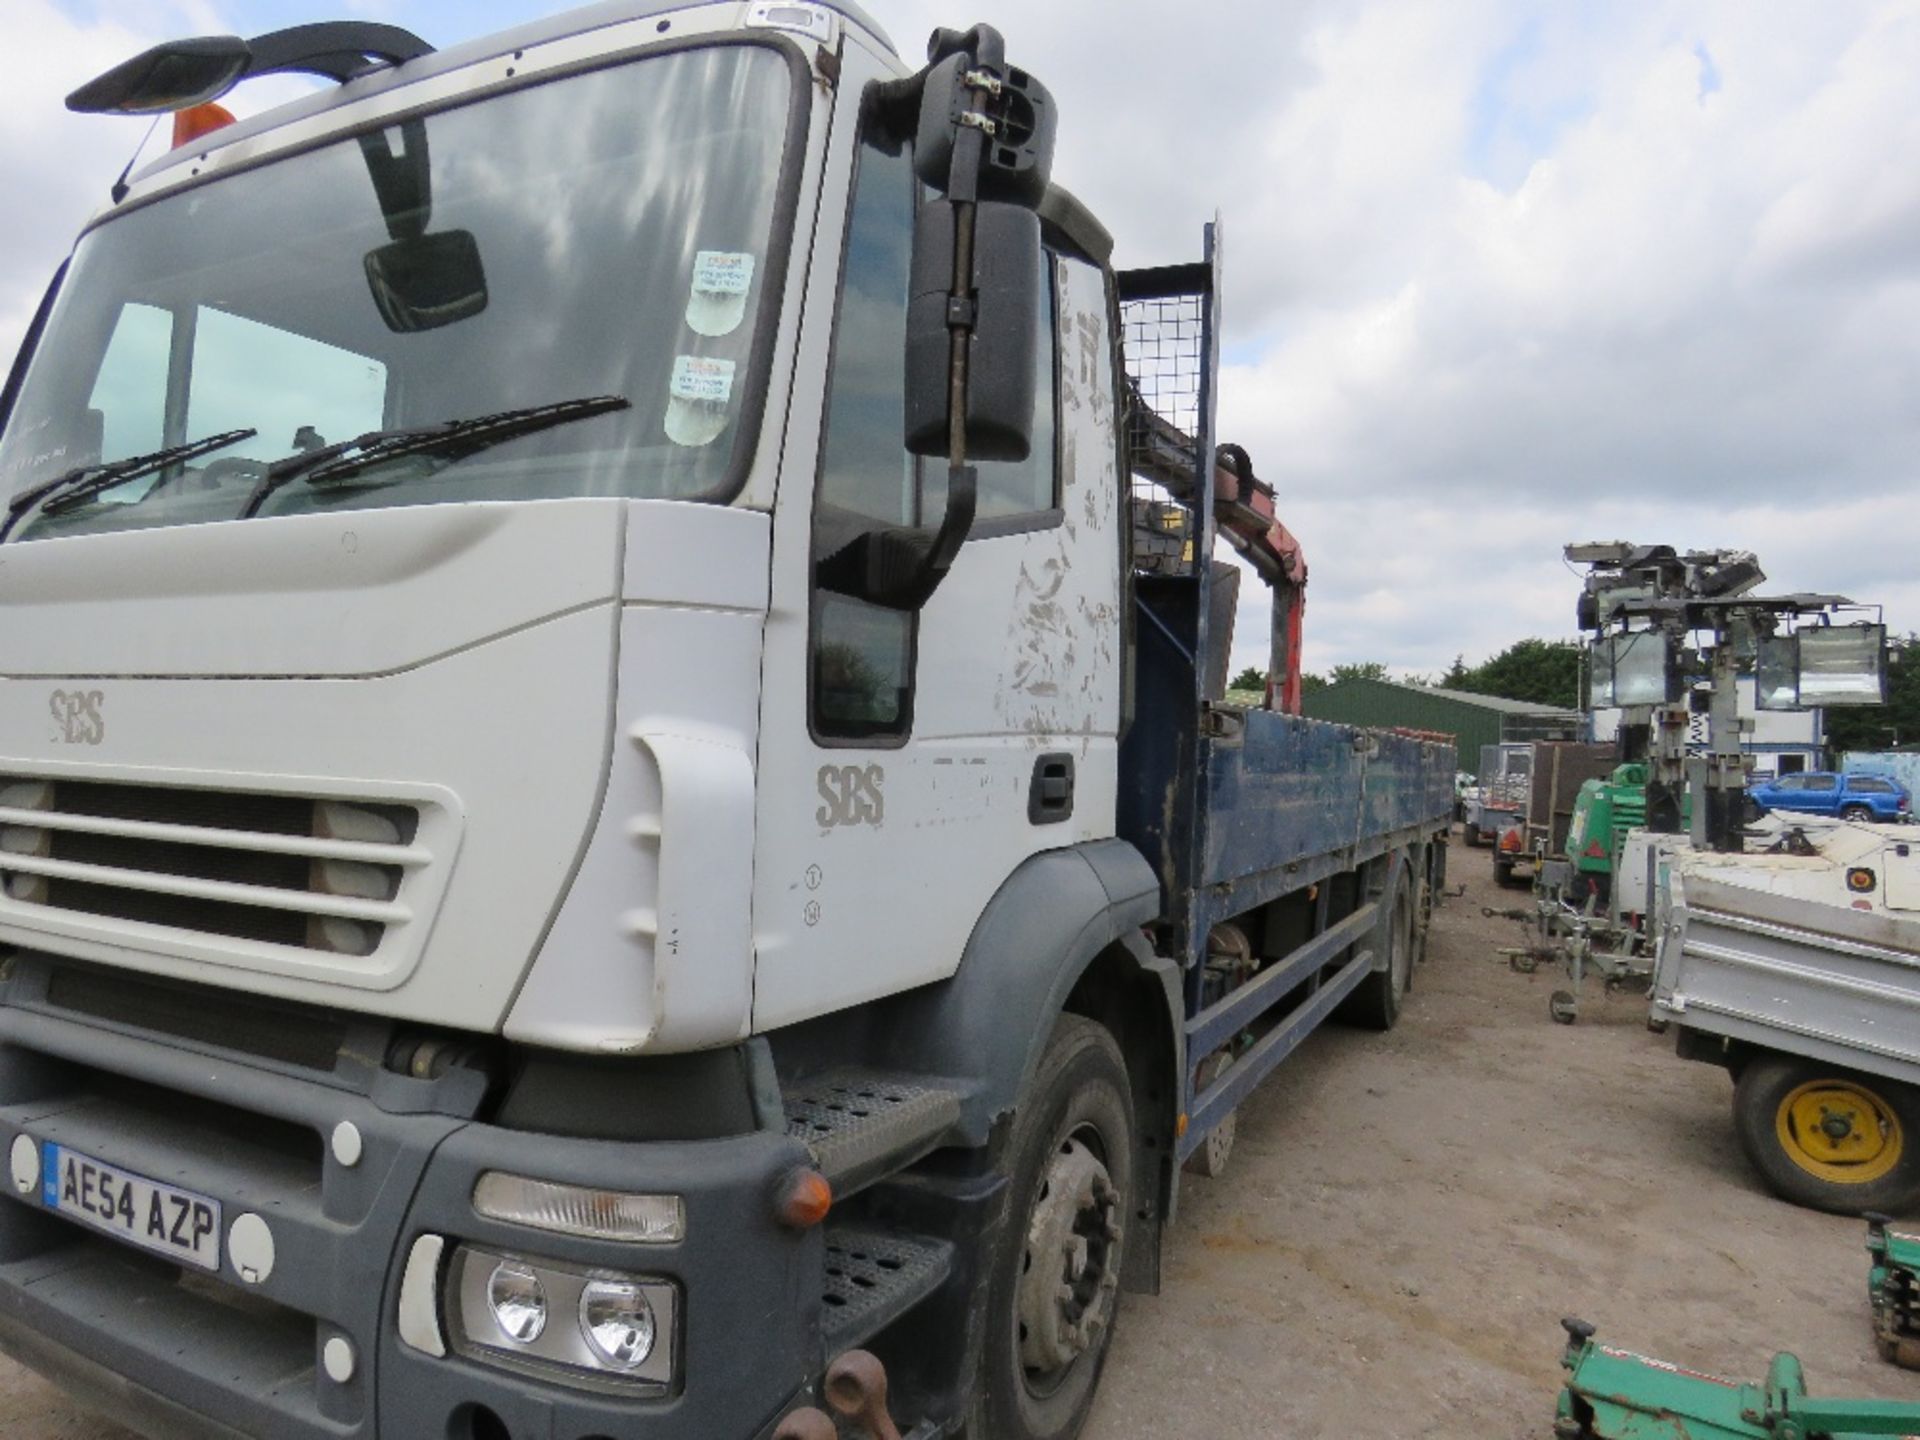 IVECO 6X2 DROP SIDE 26TONNE LORRY REG: AE54 AZP WITH REAR PALFINGER PK1200 CRANE AND BLOCK GRAB, - Image 2 of 7